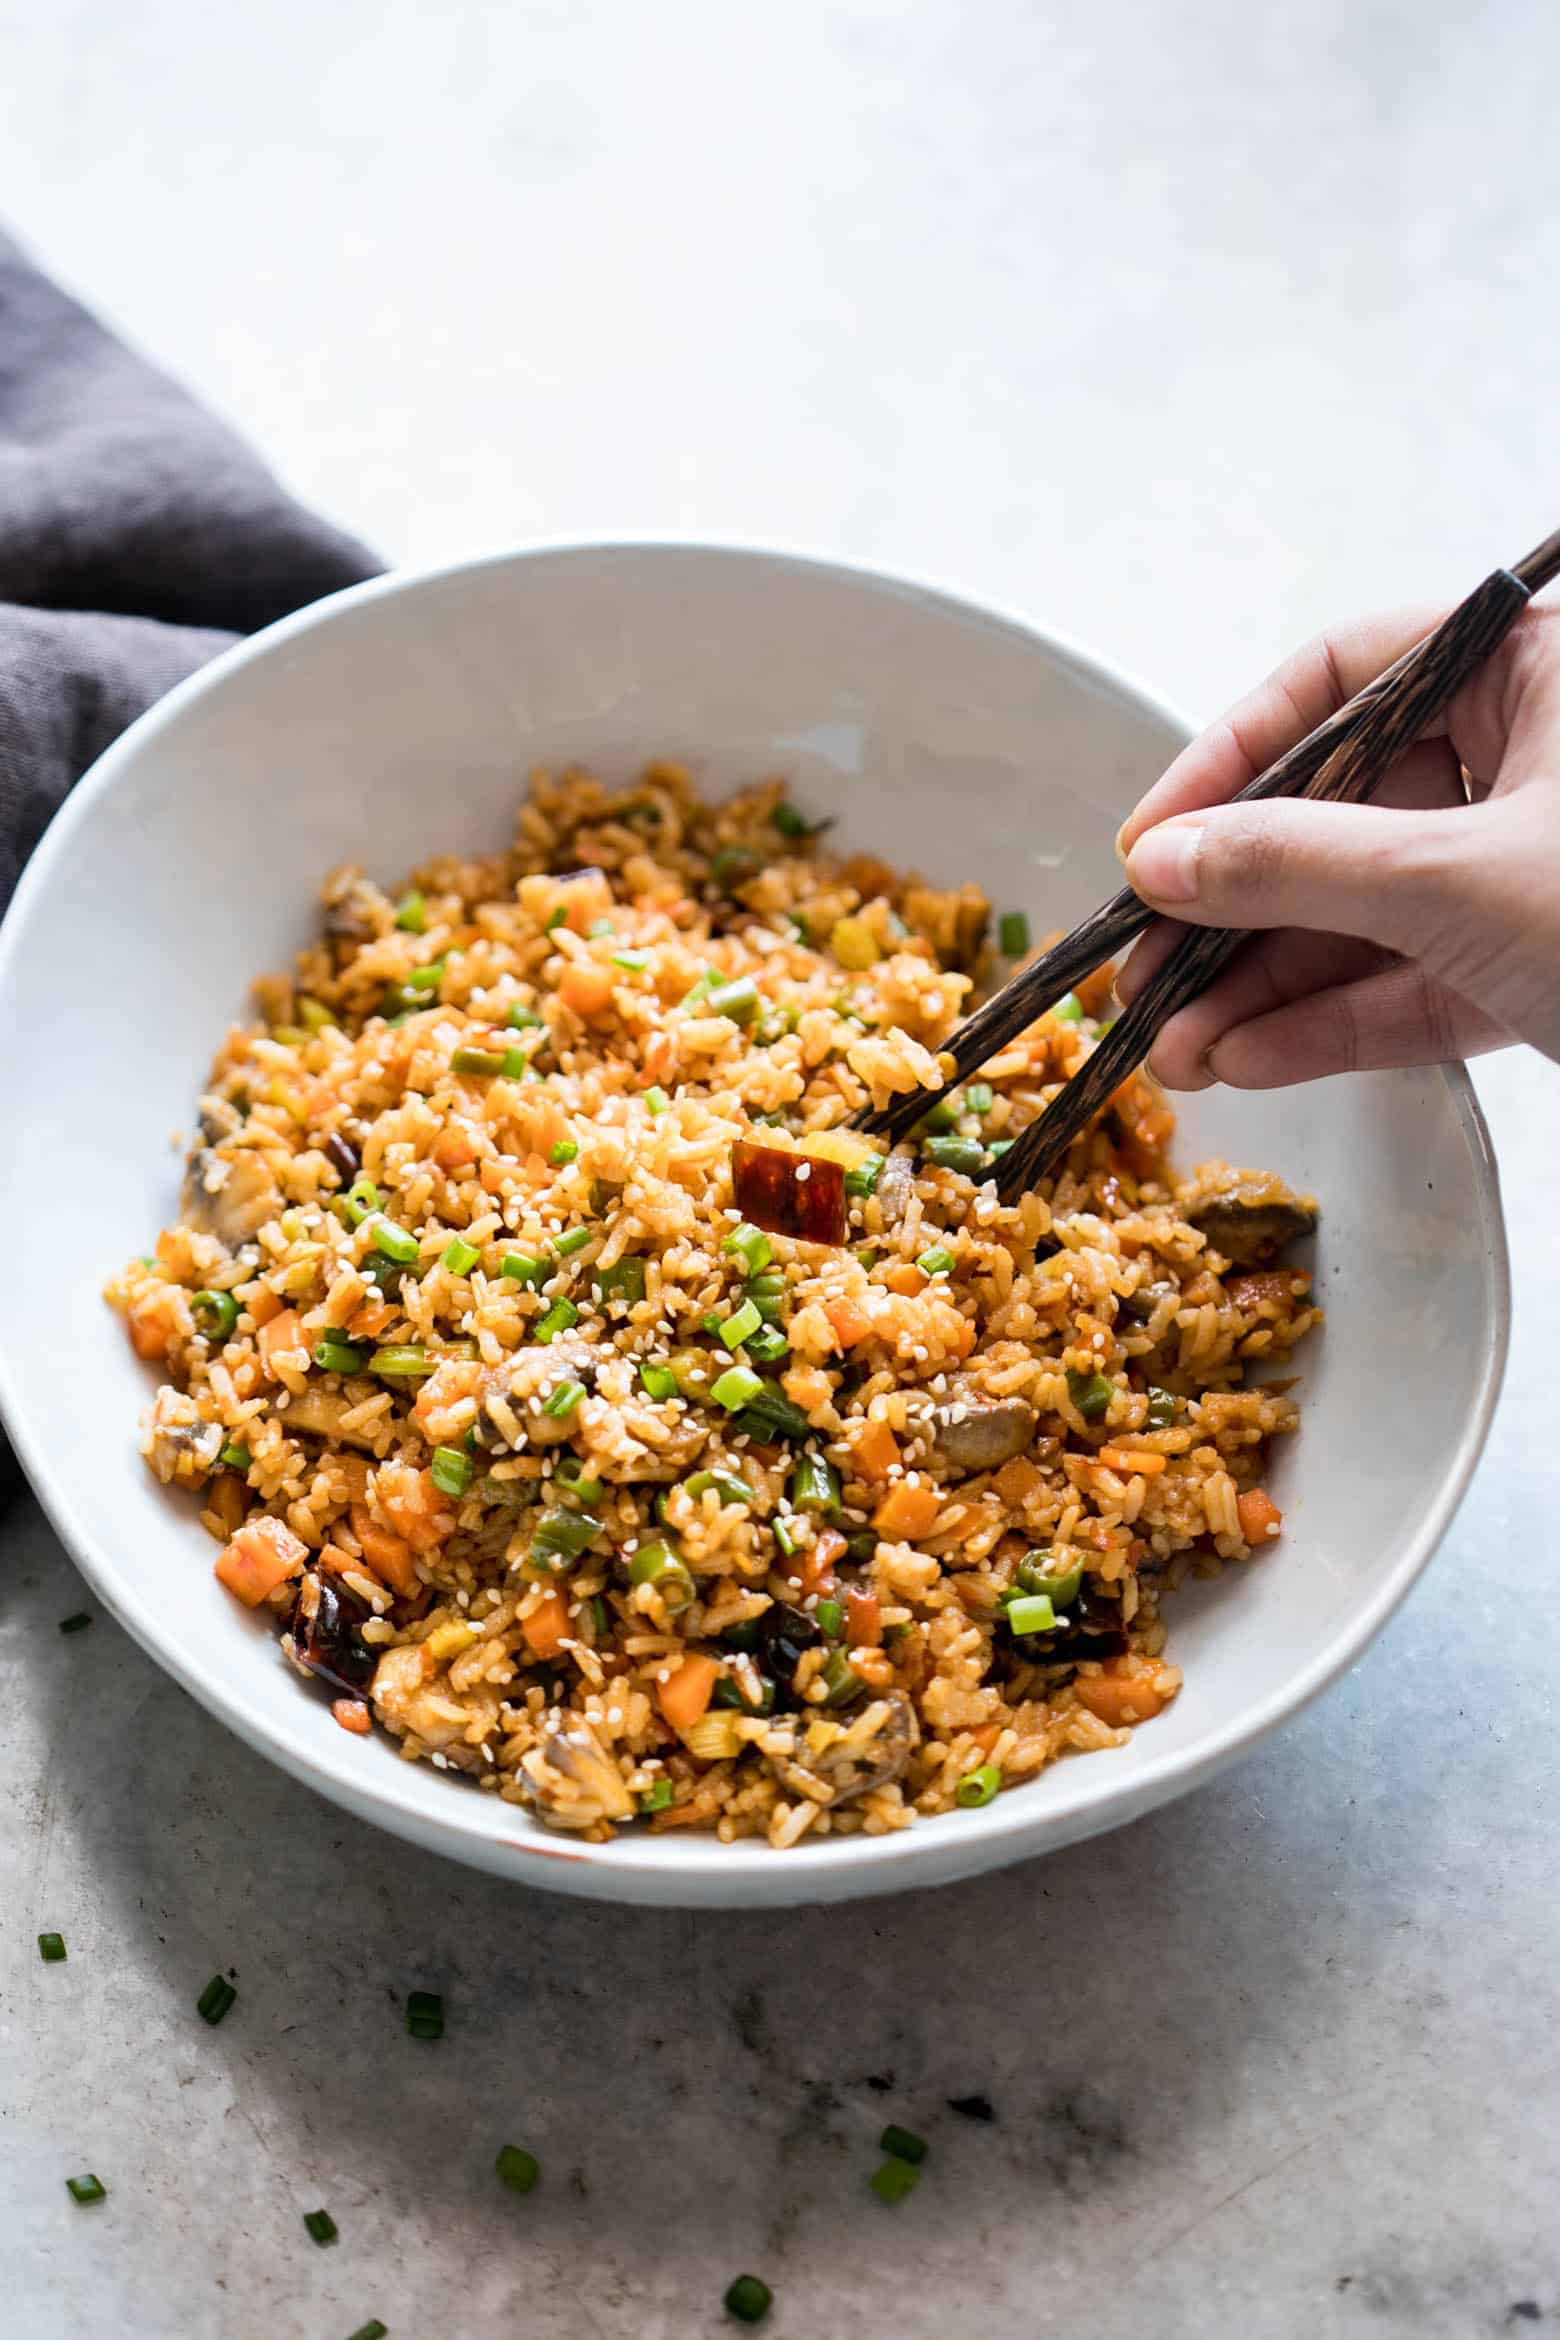 This is the best chinese schezwan fried rice you'll make - loaded with vegetables, spicy and super easy! Made with sichuan sauce, it's the best way to use leftover rice.